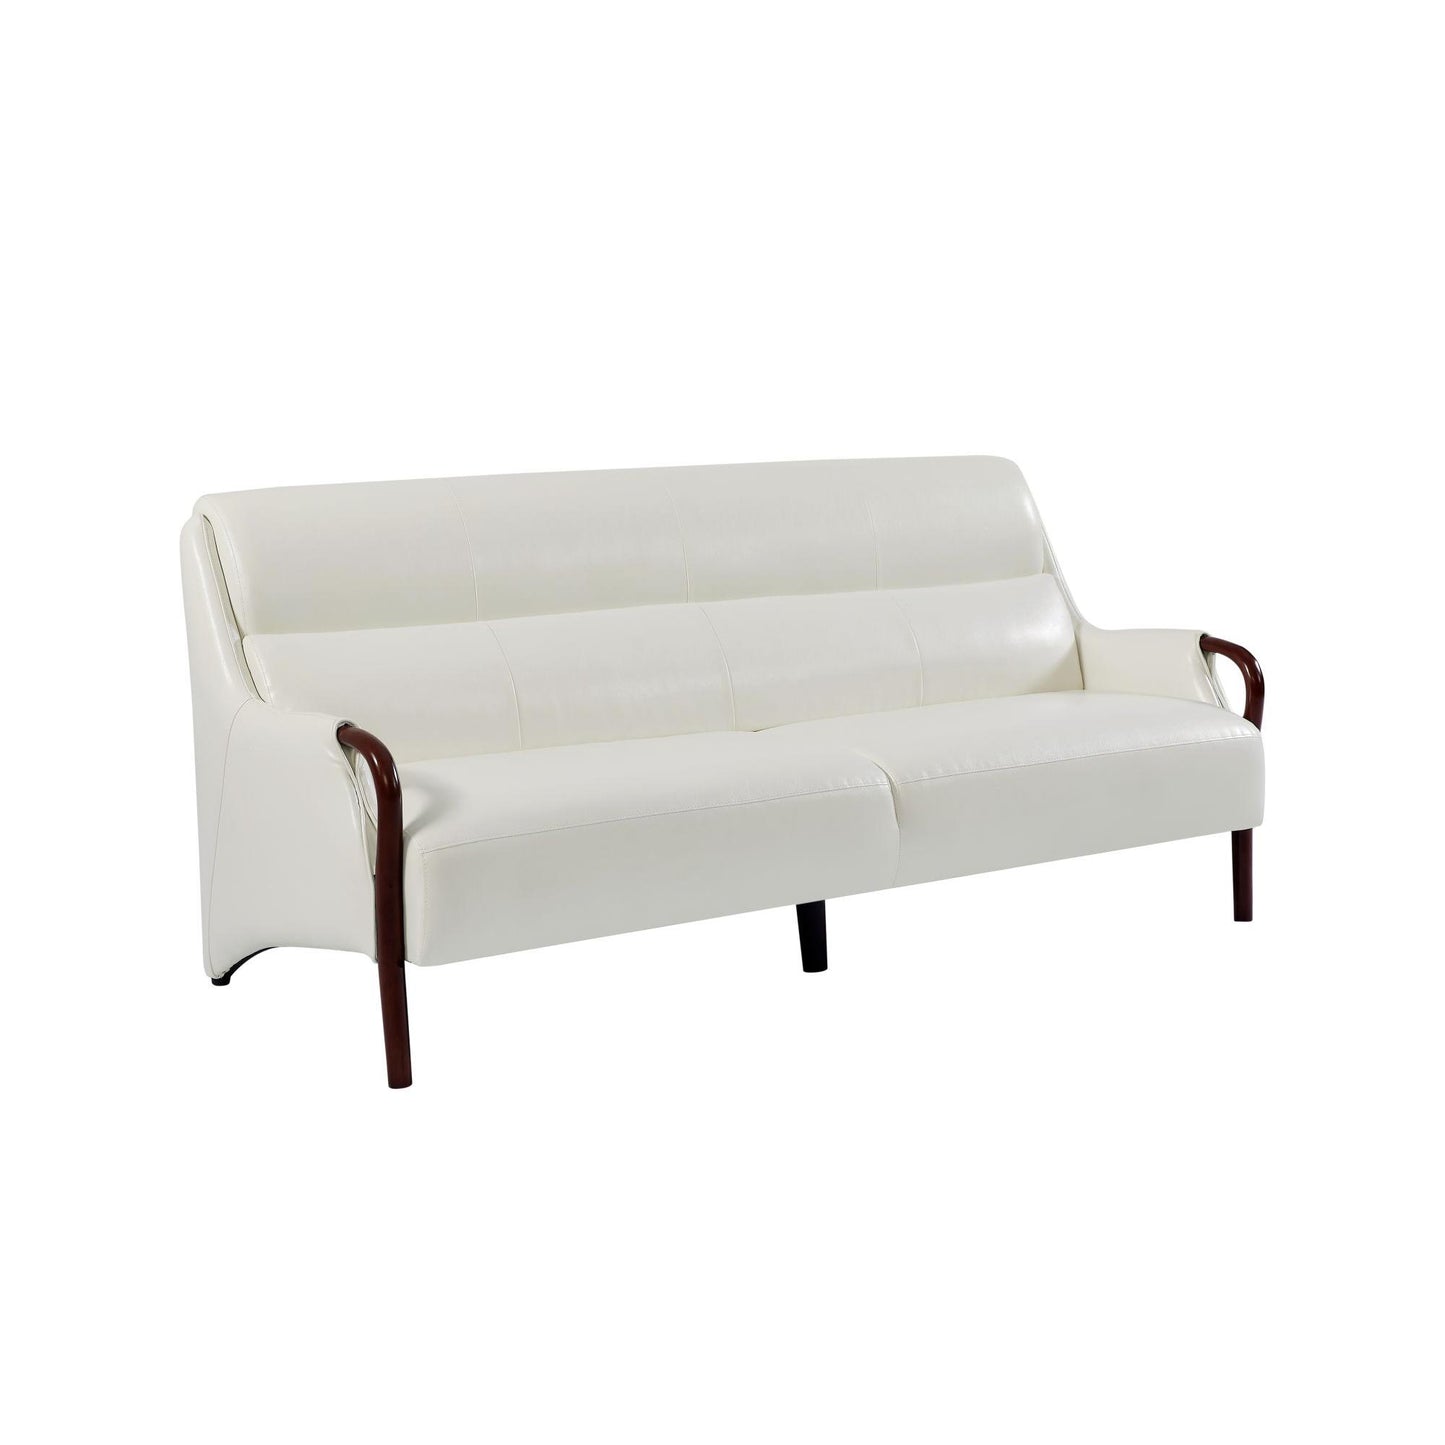 Modern-Central Sofa PU Leather Wooden Legs Bench for Living Room